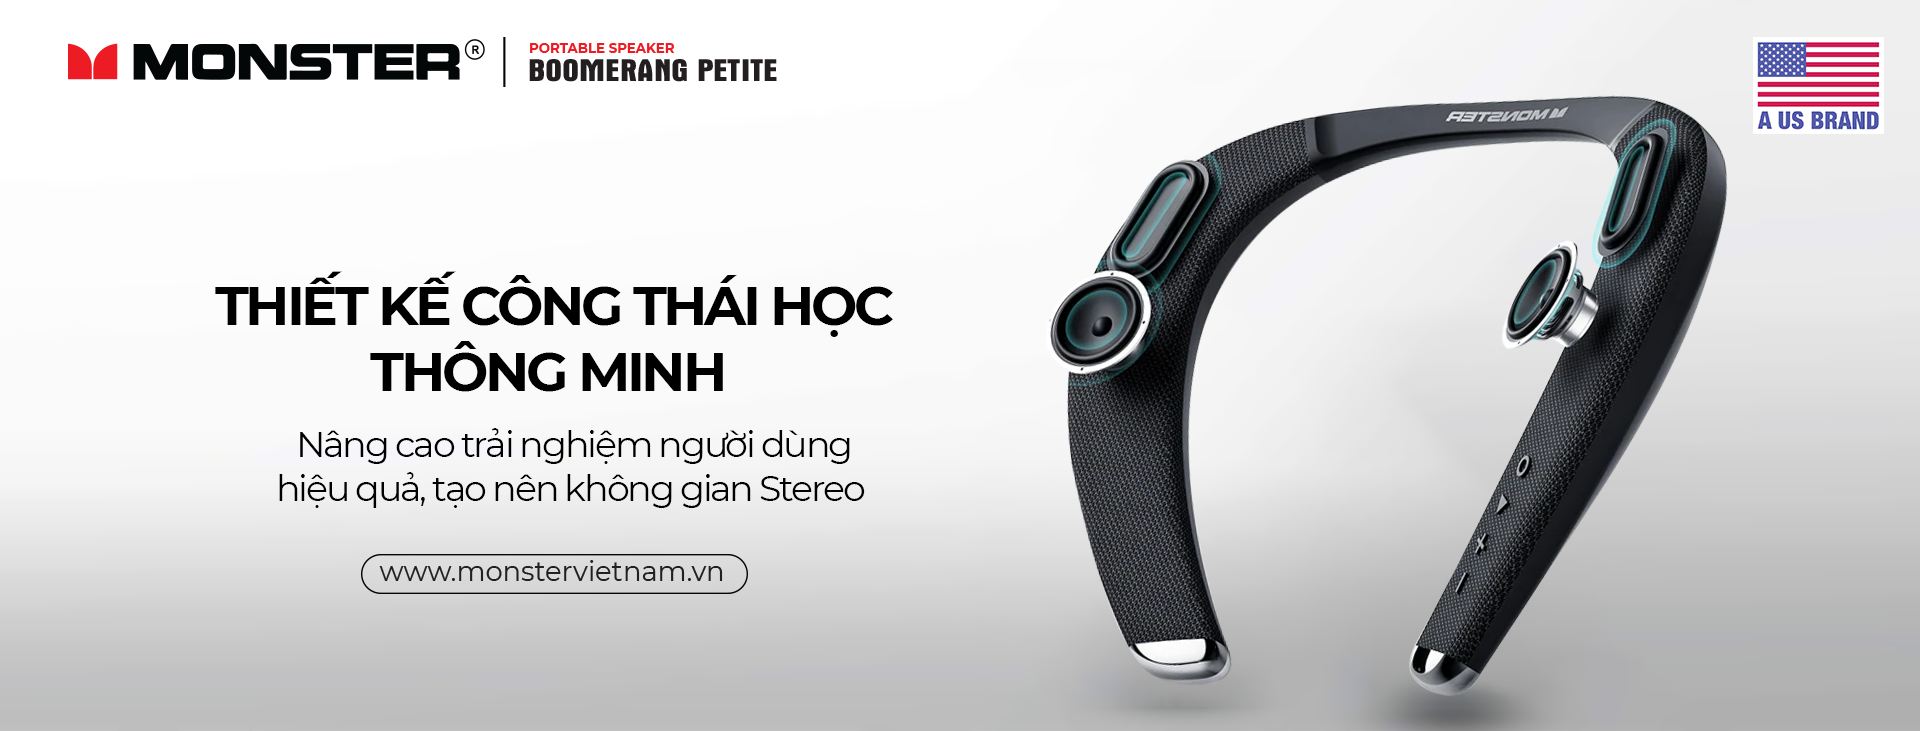 Loa Bluetooth Monster Boomerang Petite | Anh Duy Audio